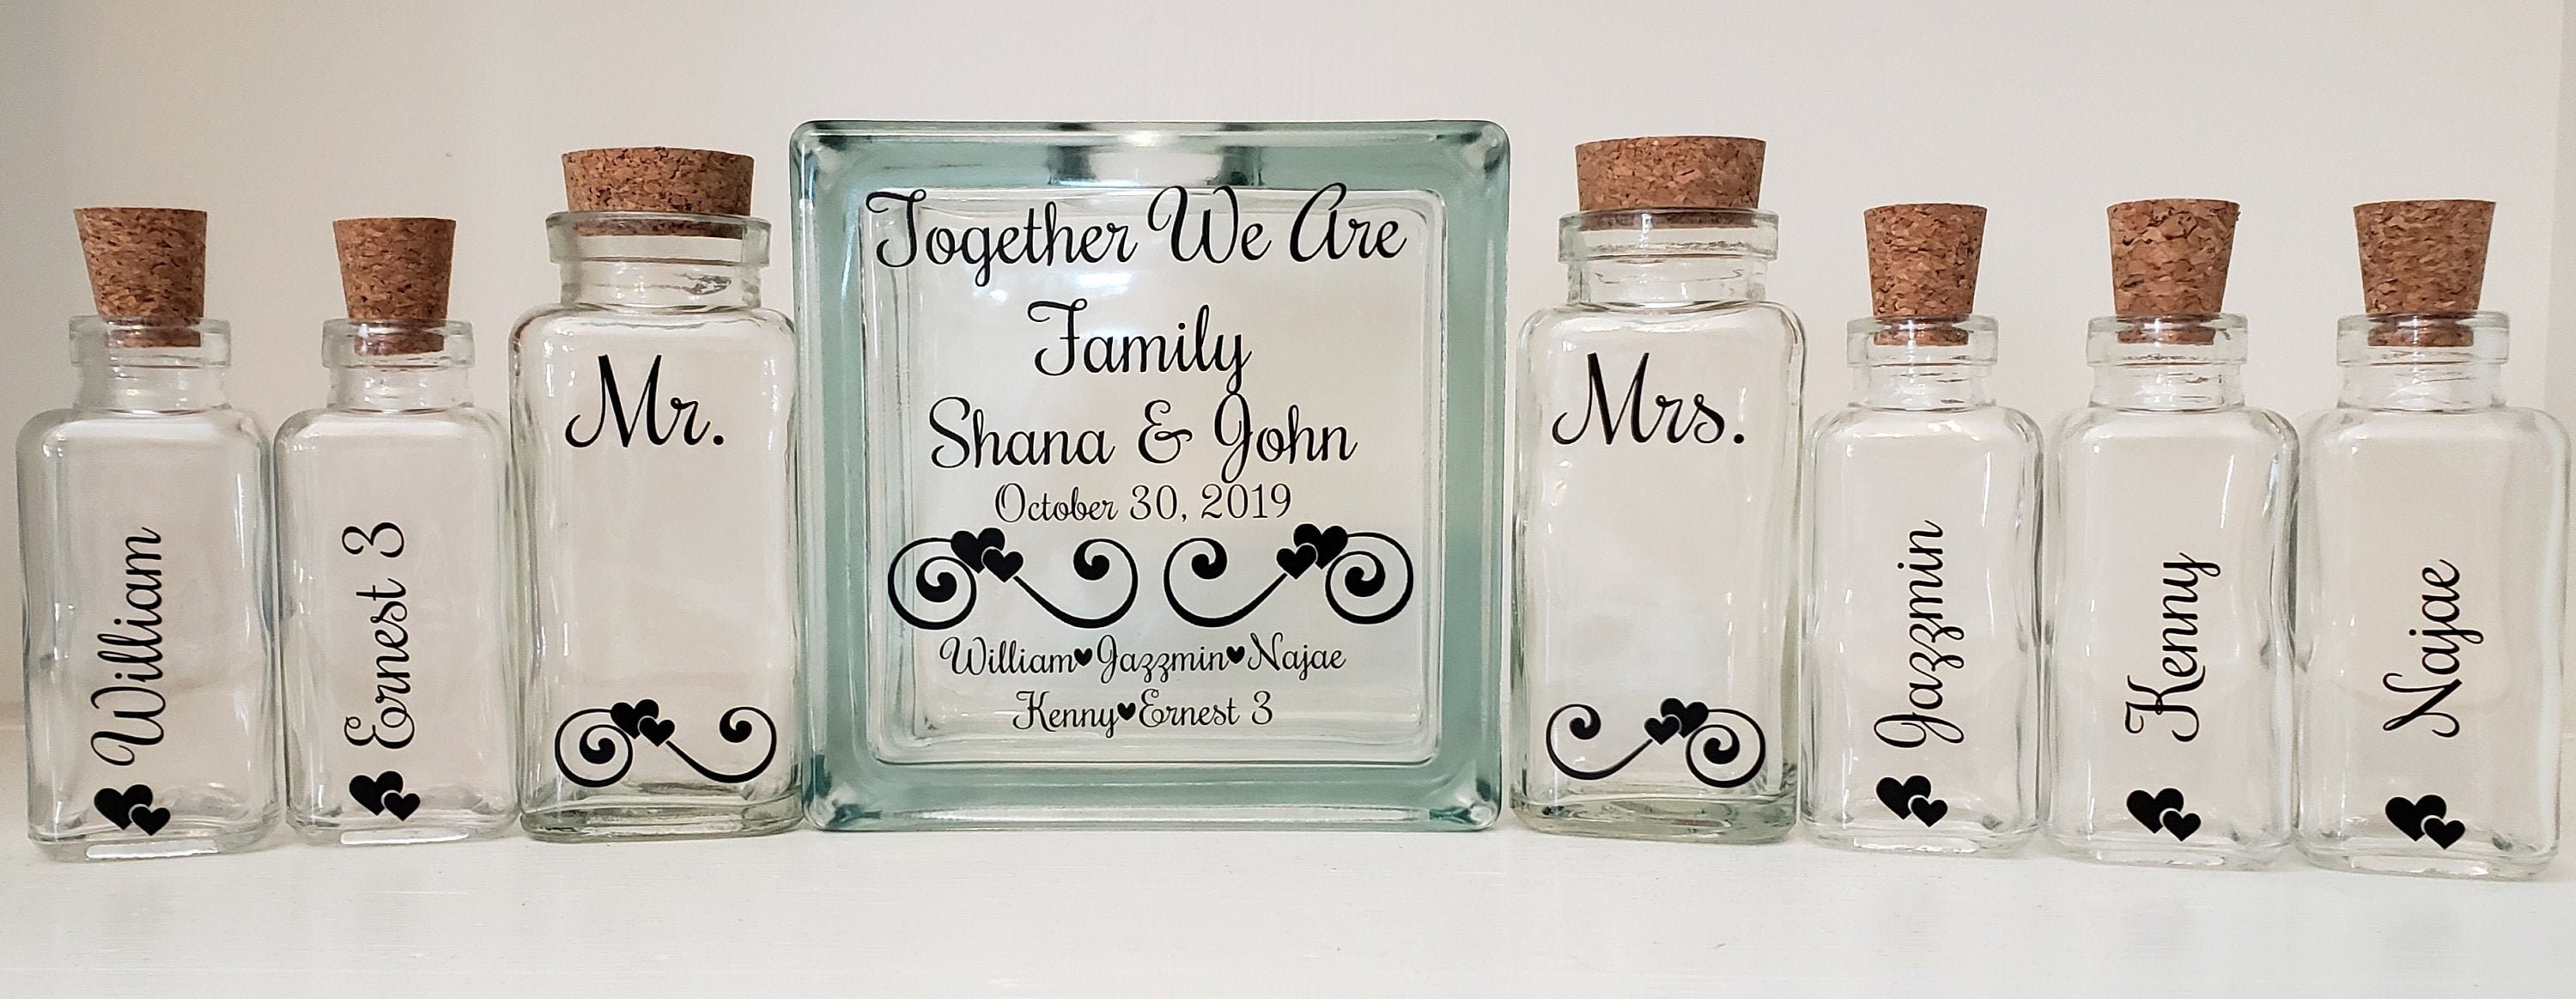 Wedding Unity Sand Ceremony Set Blended Family - Together We Are Marriage Commitment Tpuwus84